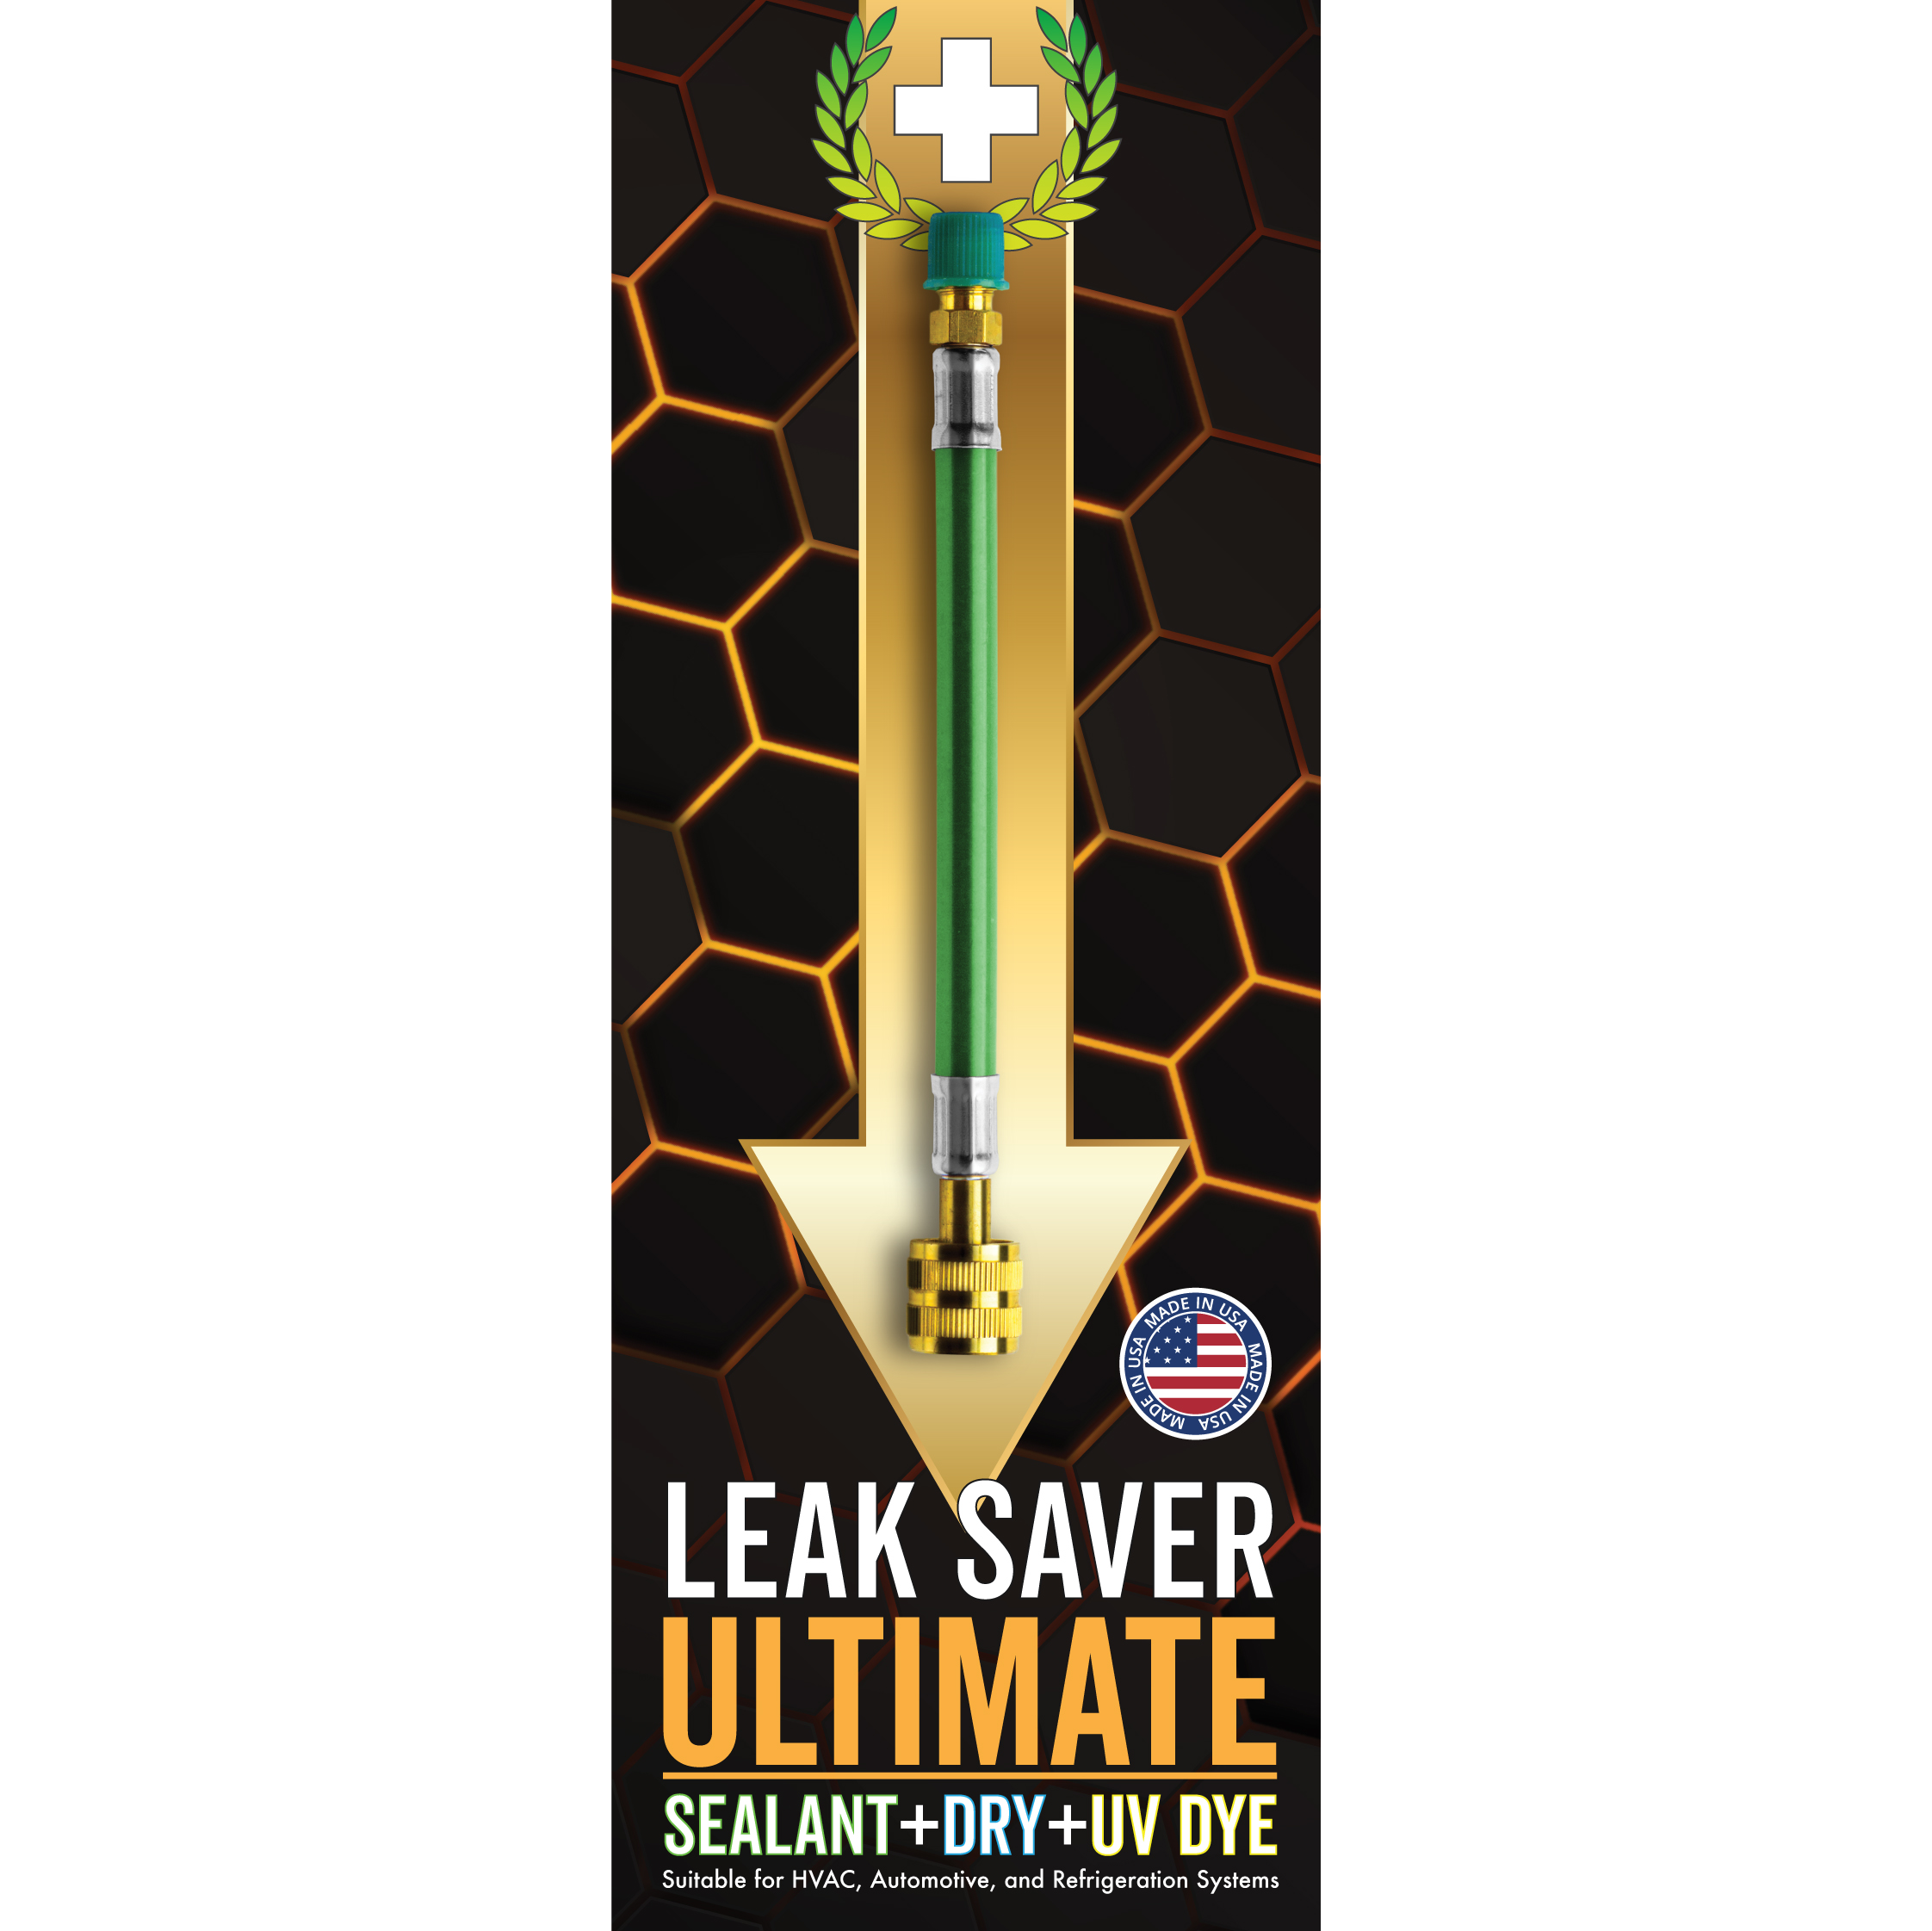 Parent Small Leak Saver: Direct Inject UV USA Made Refrigerant Leak Sealer for Air Conditioner and Refrigeration Systems Up to 5 Tons Dye Detects Large Leaks for Repair 